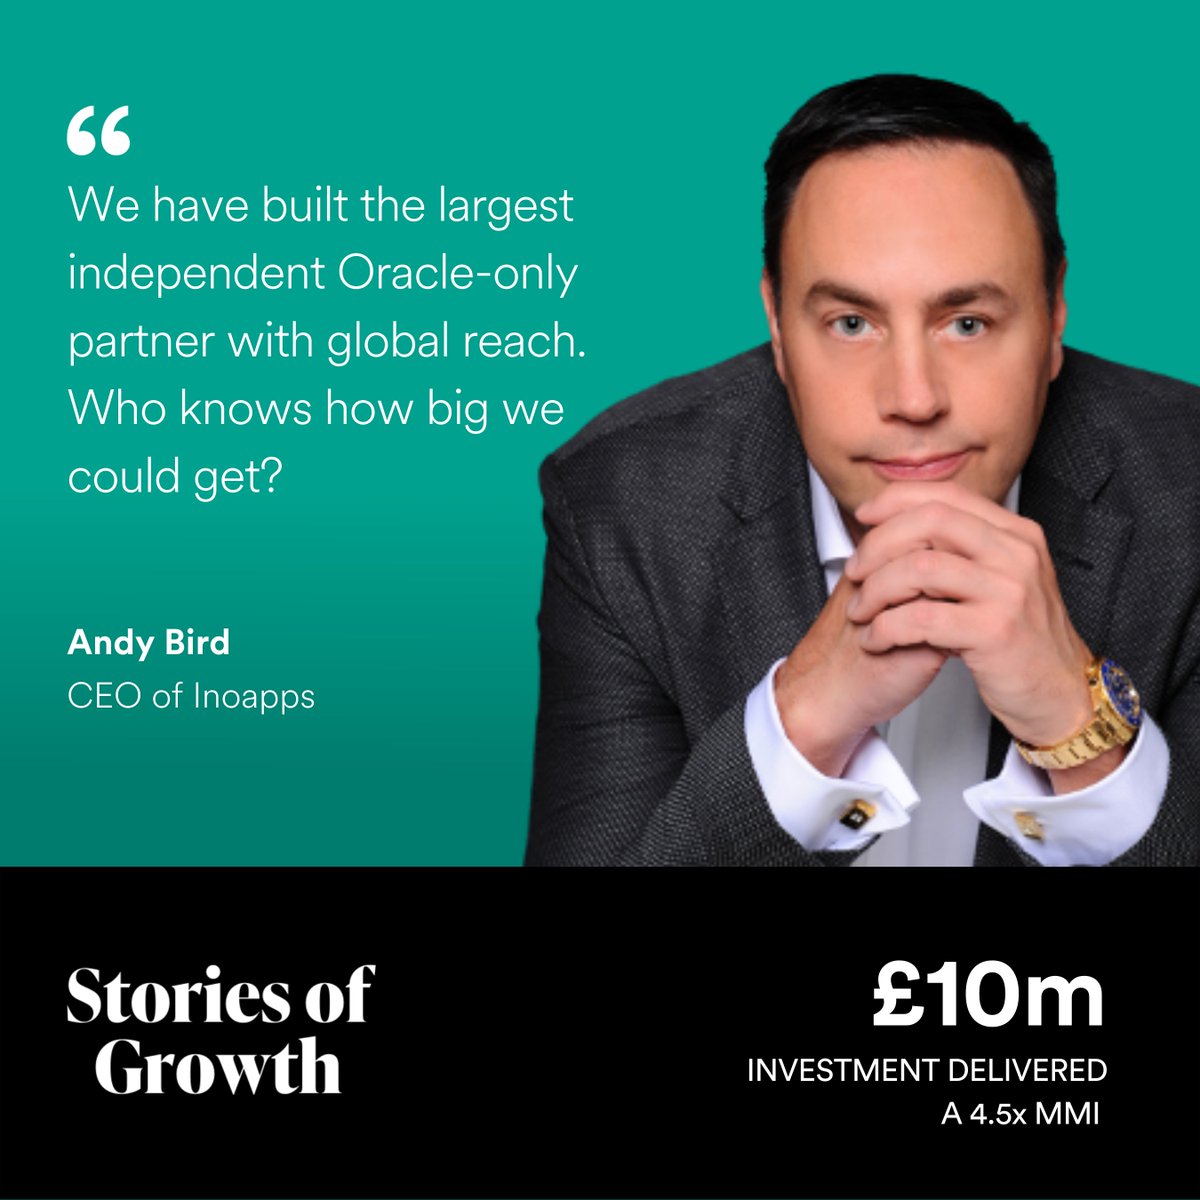 After investing in Inoapps since 2013, we were delighted to see it move to the next stage of its journey this year in partnership with private equity. In this interview, founder and CEO Andy Bird talks about the Inoapps story. ow.ly/HNjA50JJpGM